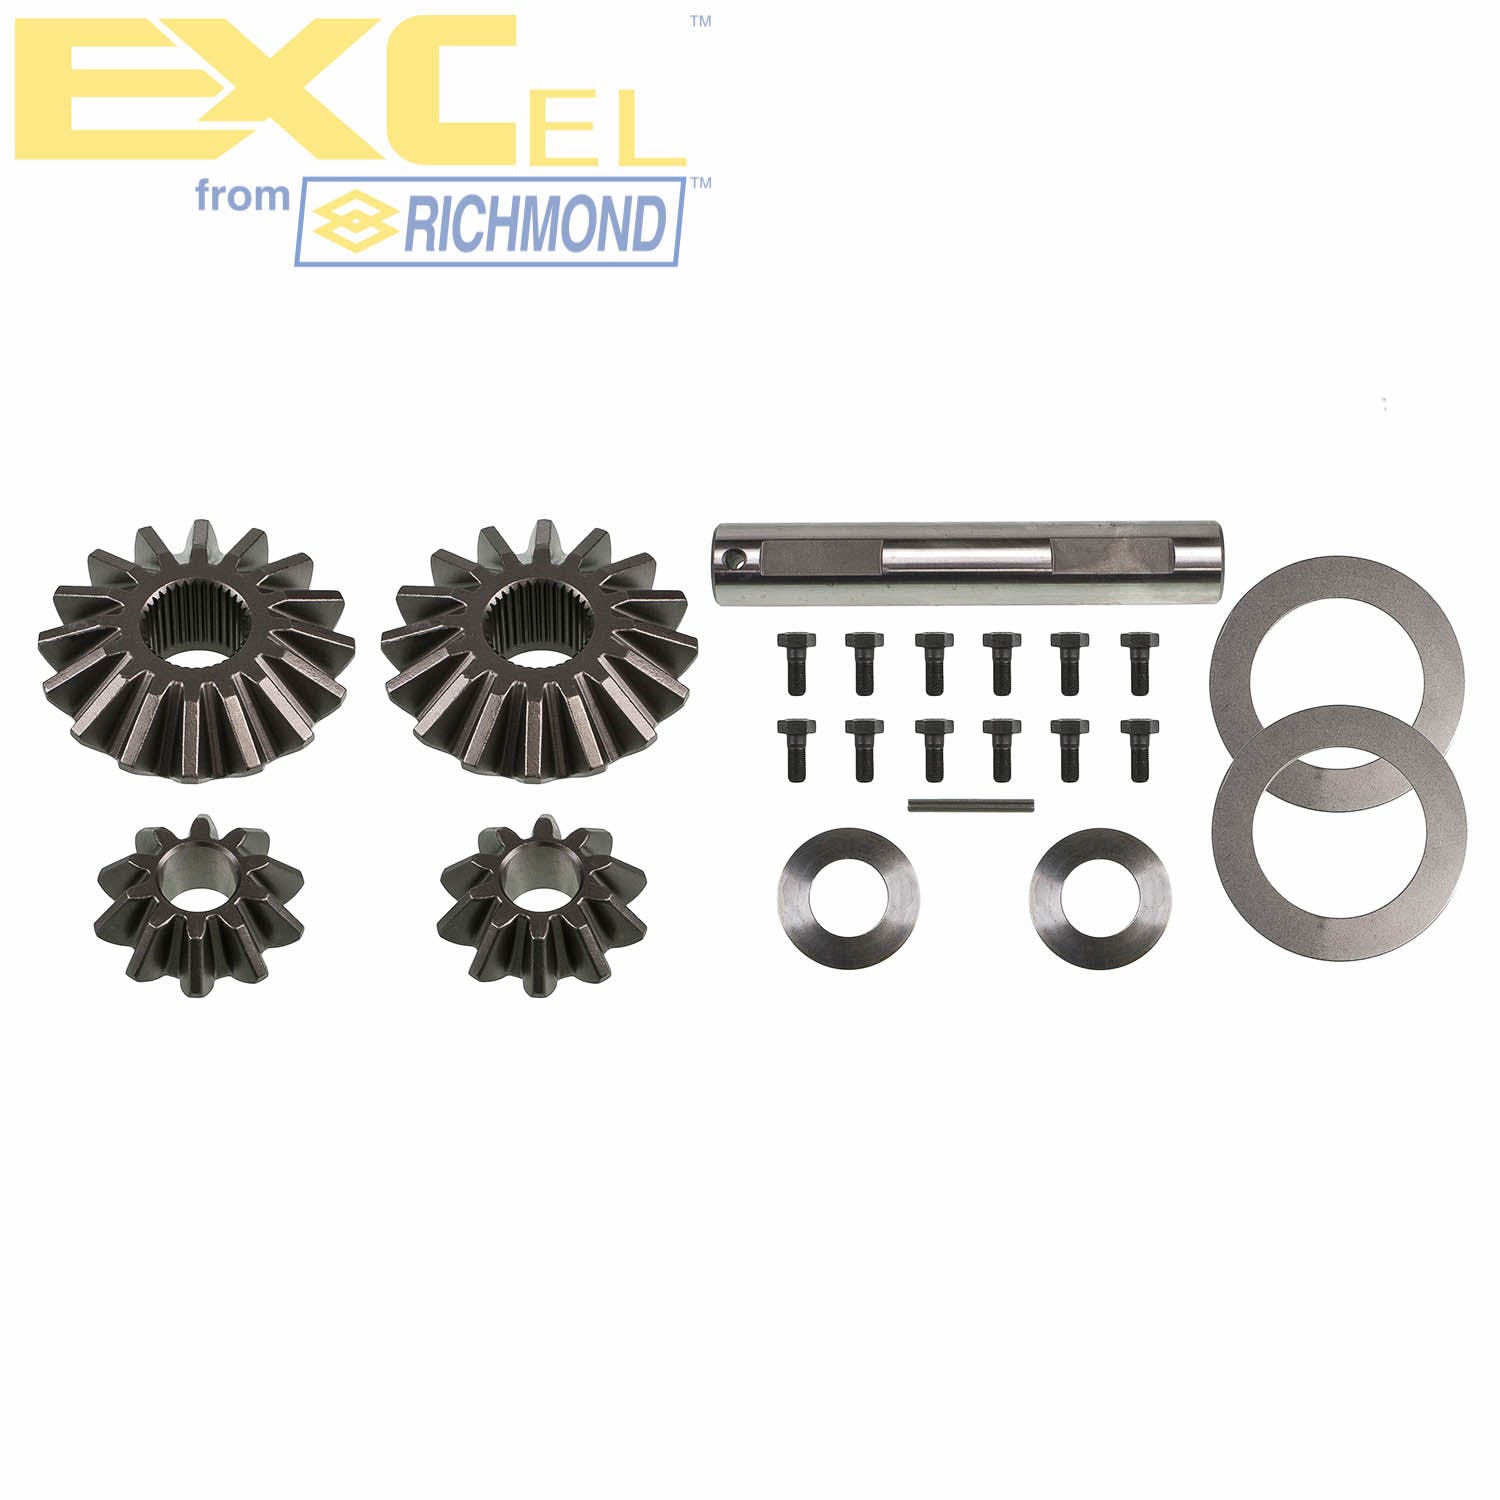 Excel XL-4074 Differential Carrier Gear Kit